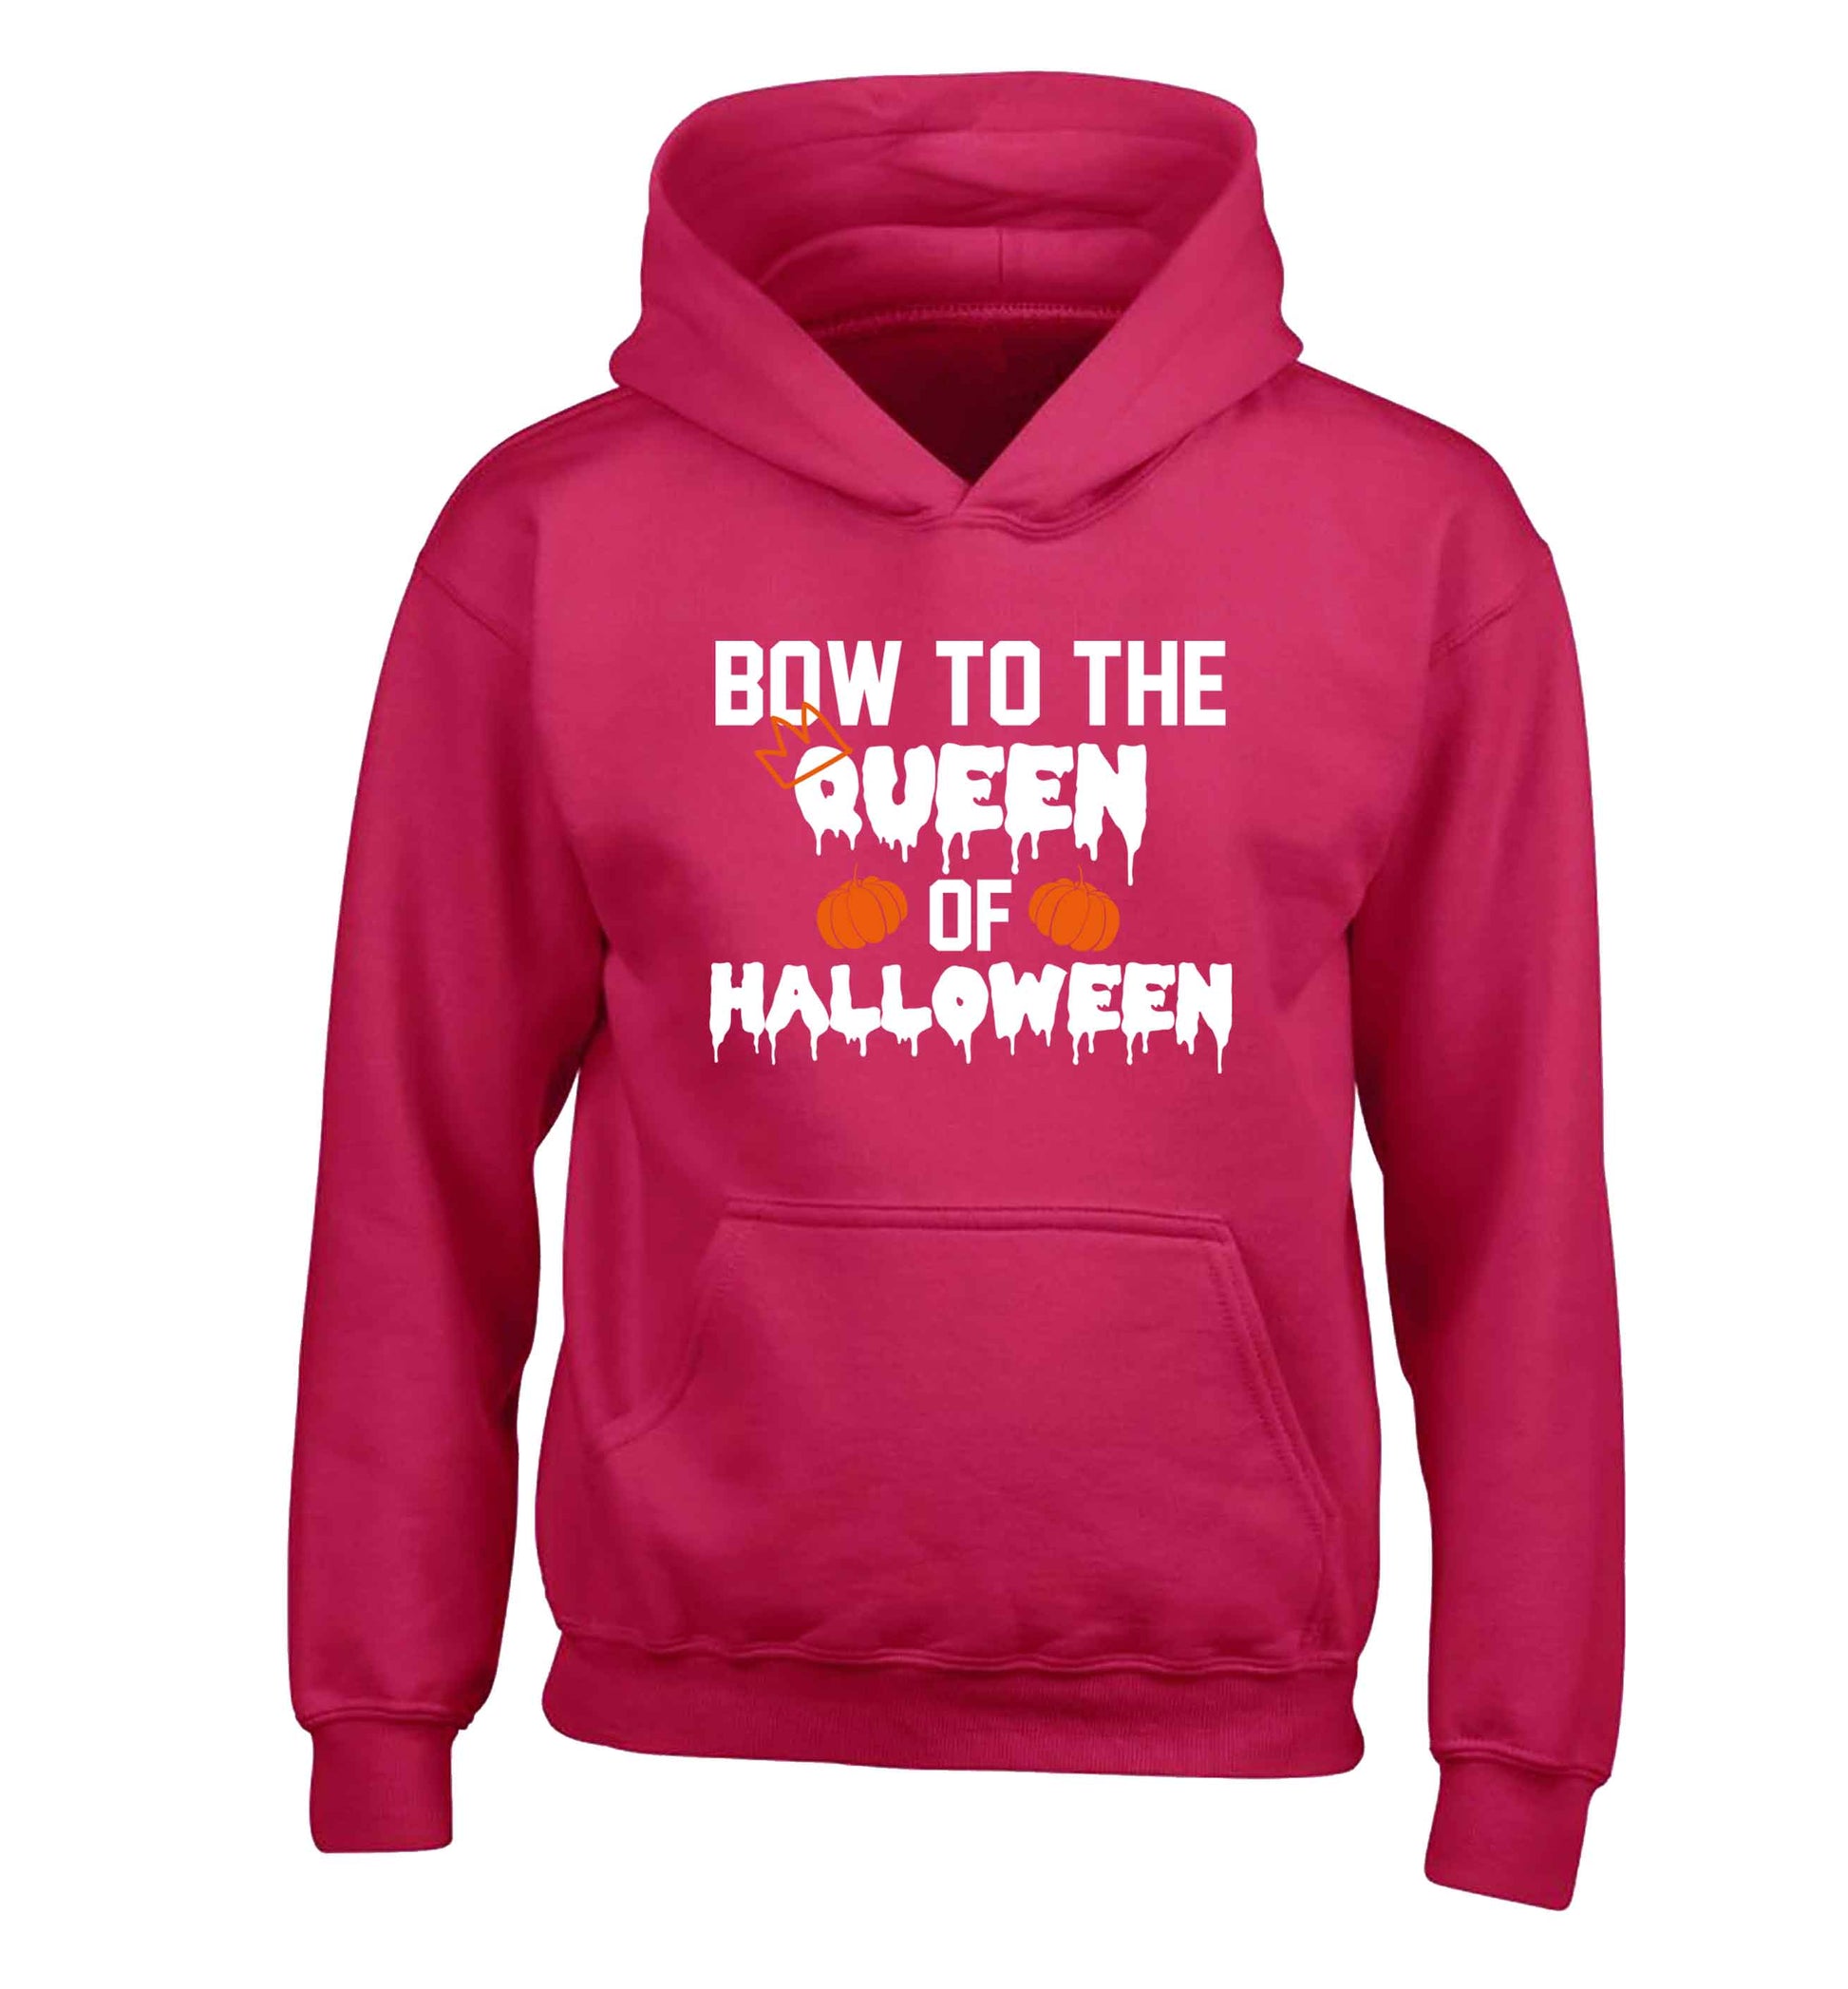 Bow to the Queen of halloween children's pink hoodie 12-13 Years